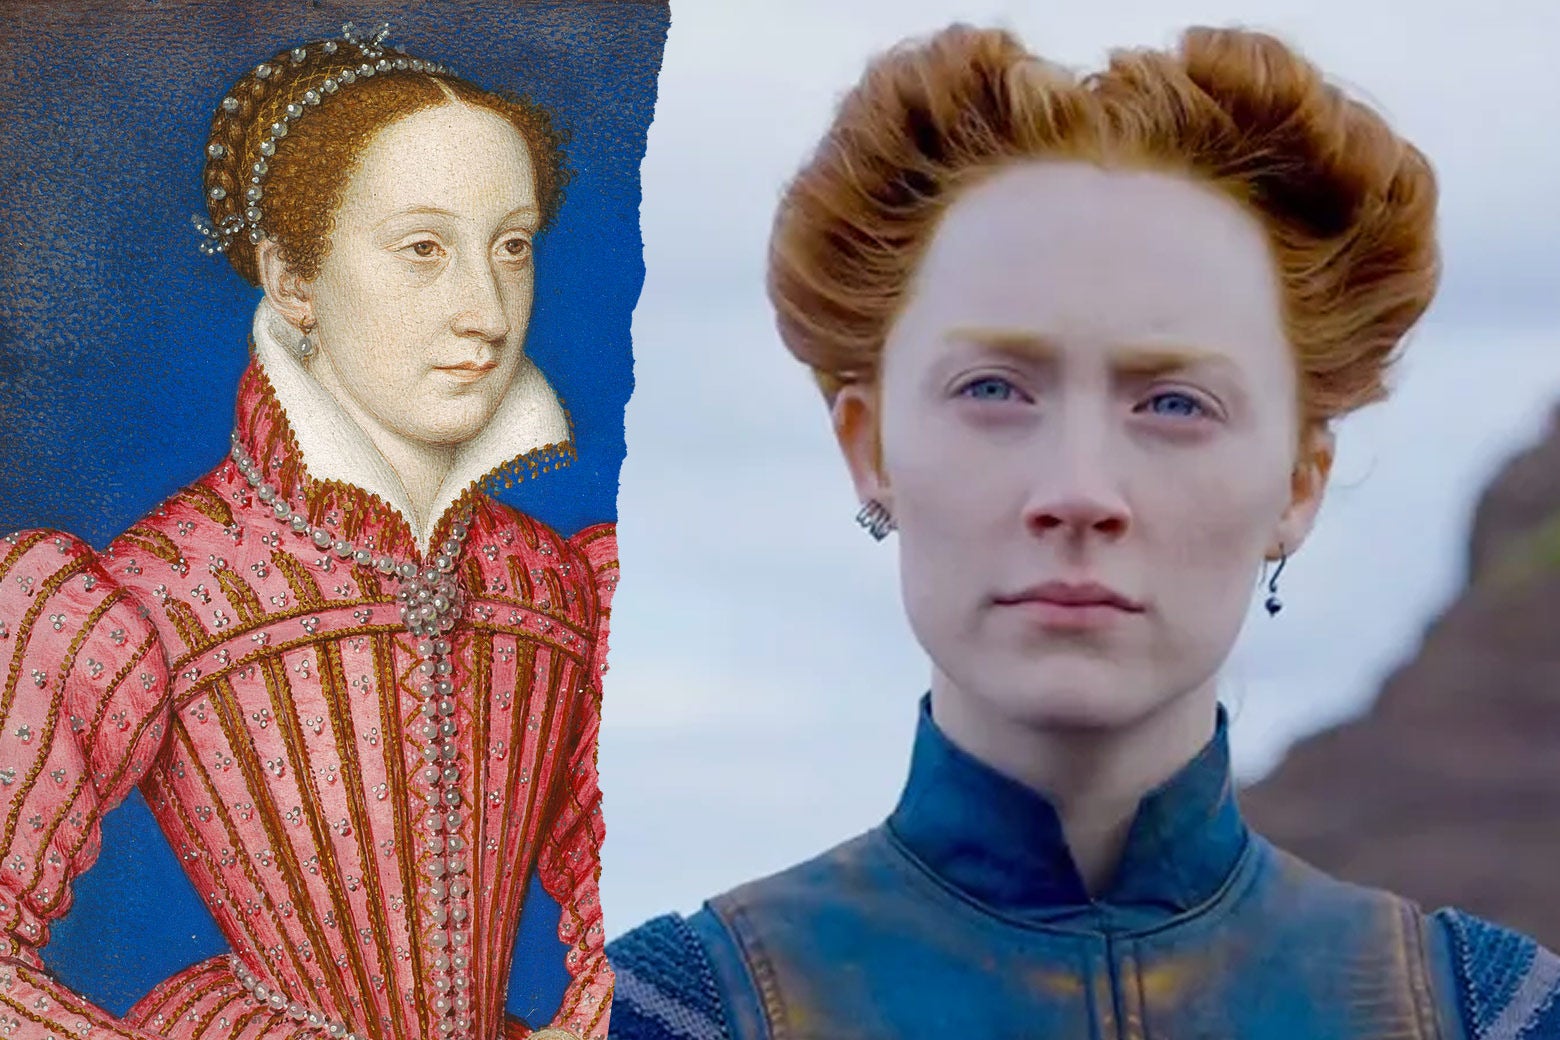 The life of Mary, Queen of Scots